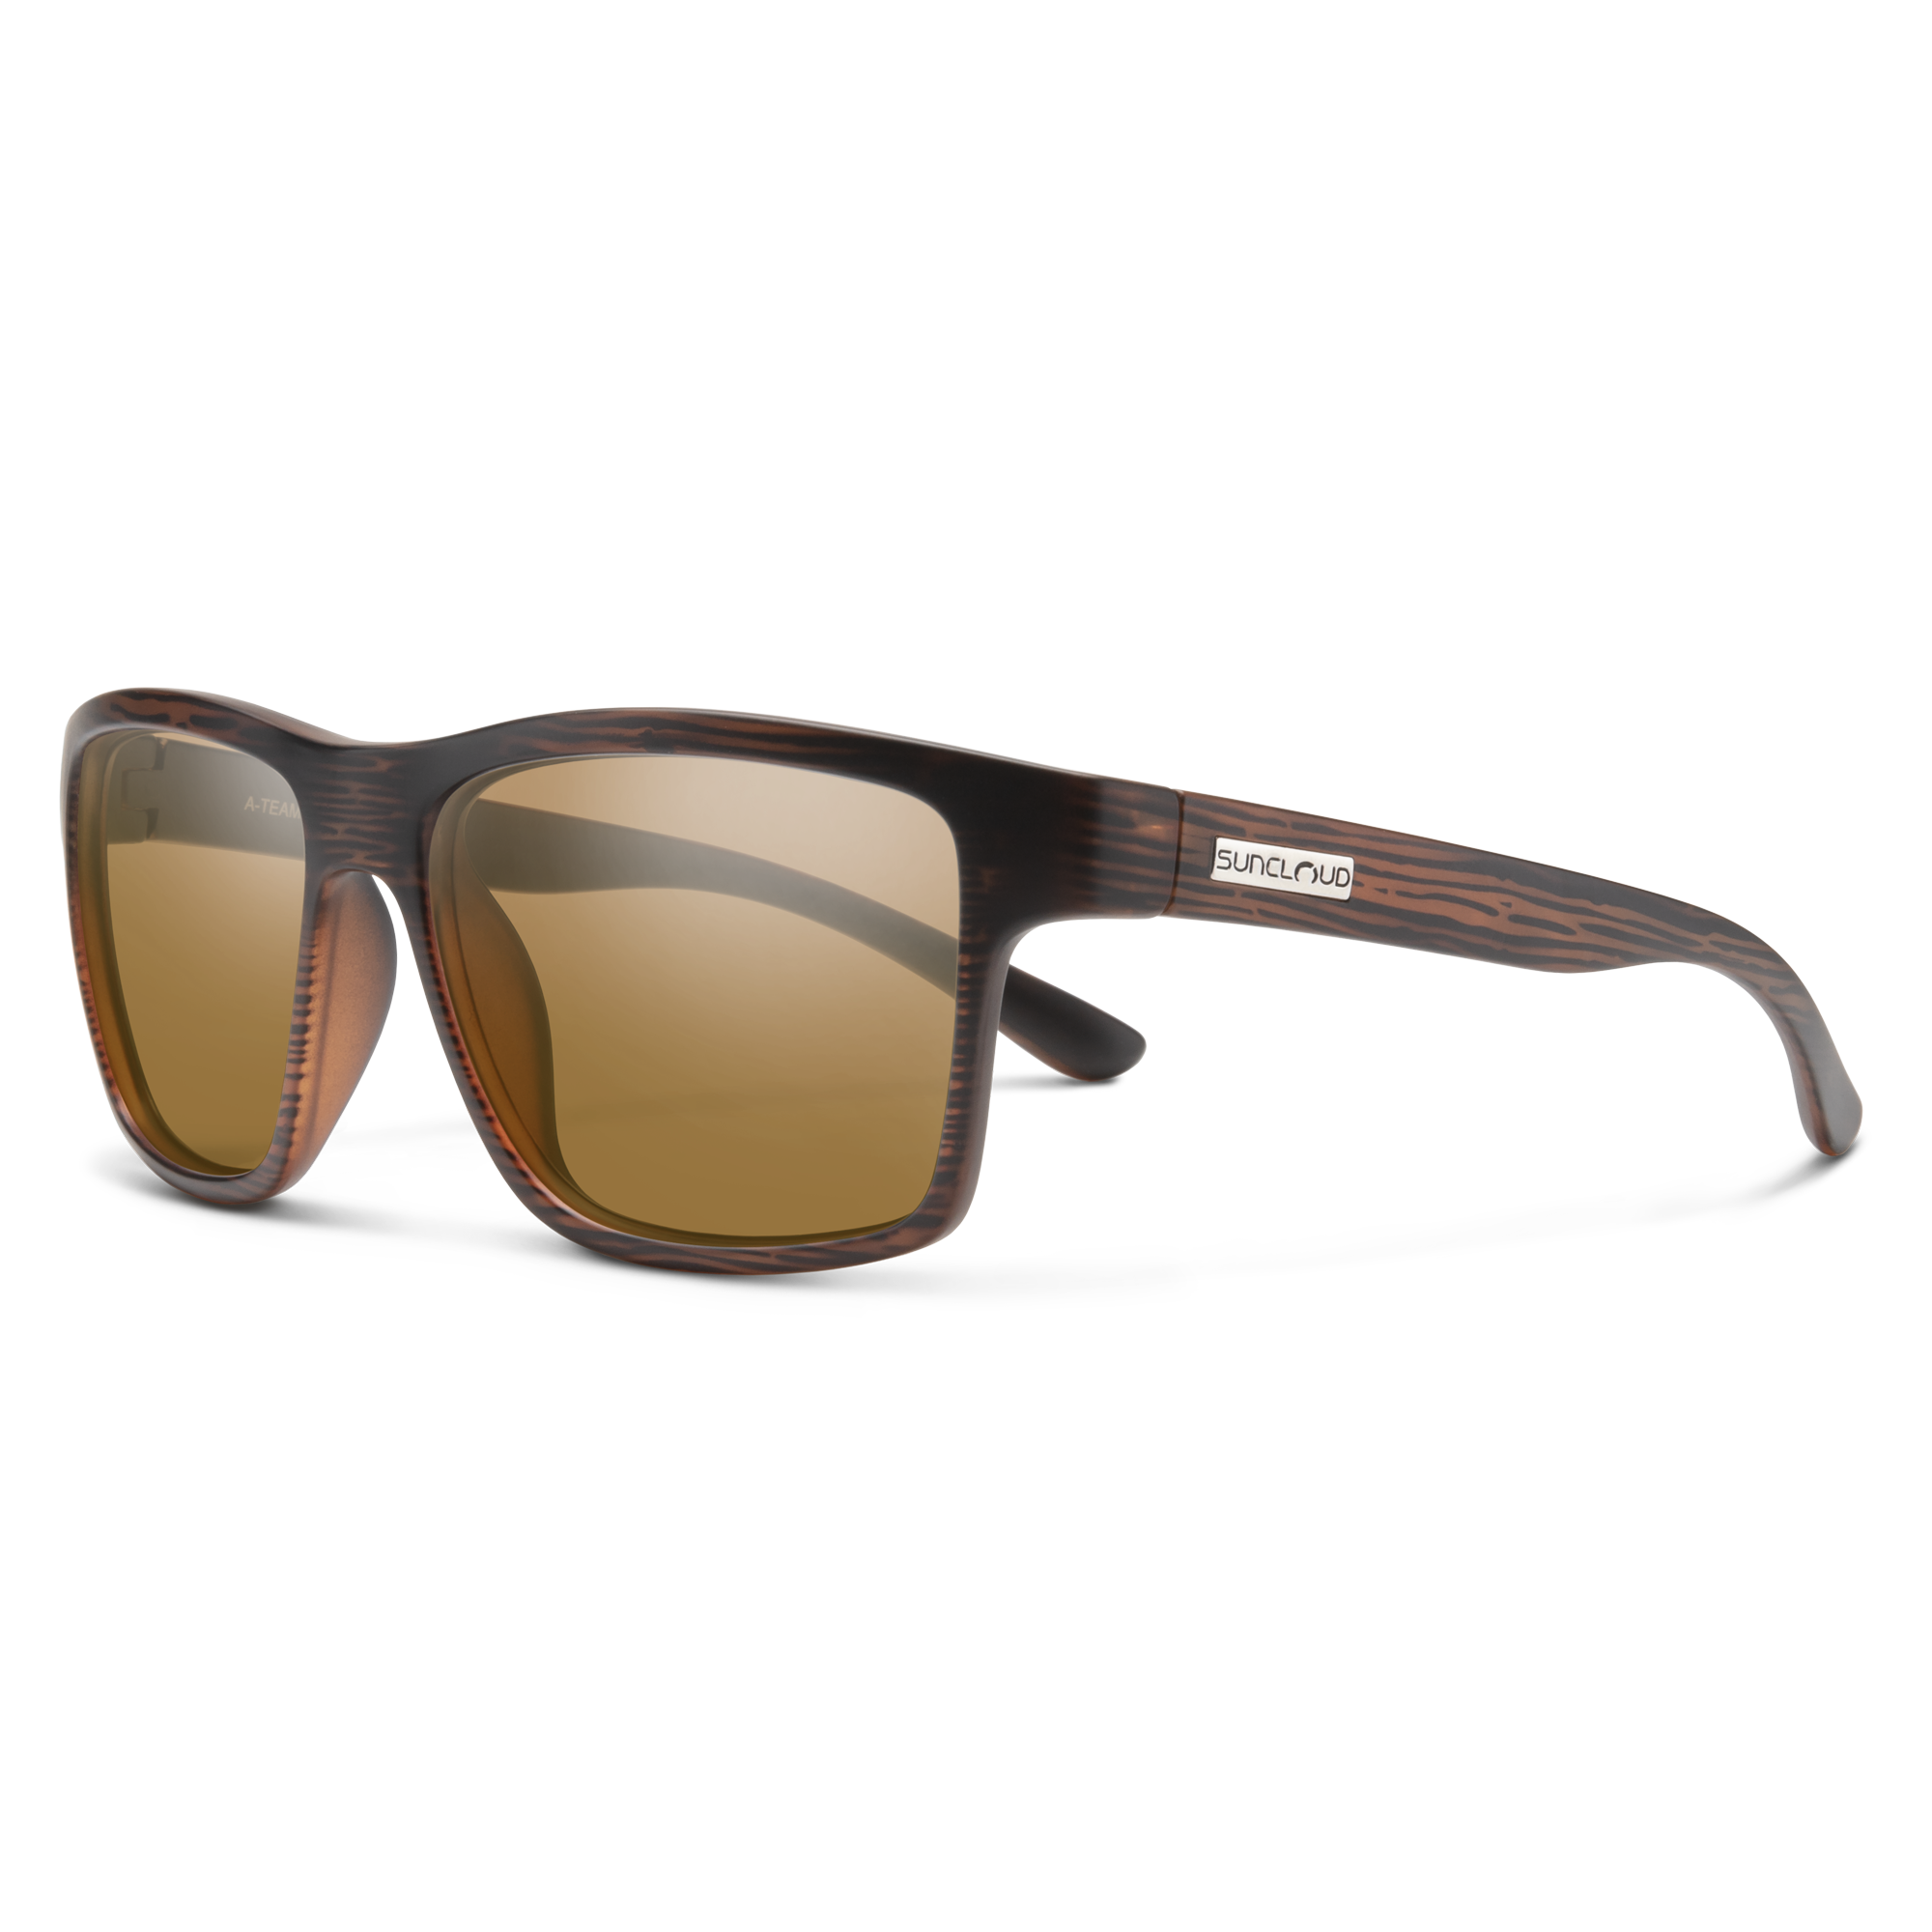 A-Team, Burnised Brown + Polarized Brown Lens, hi-res